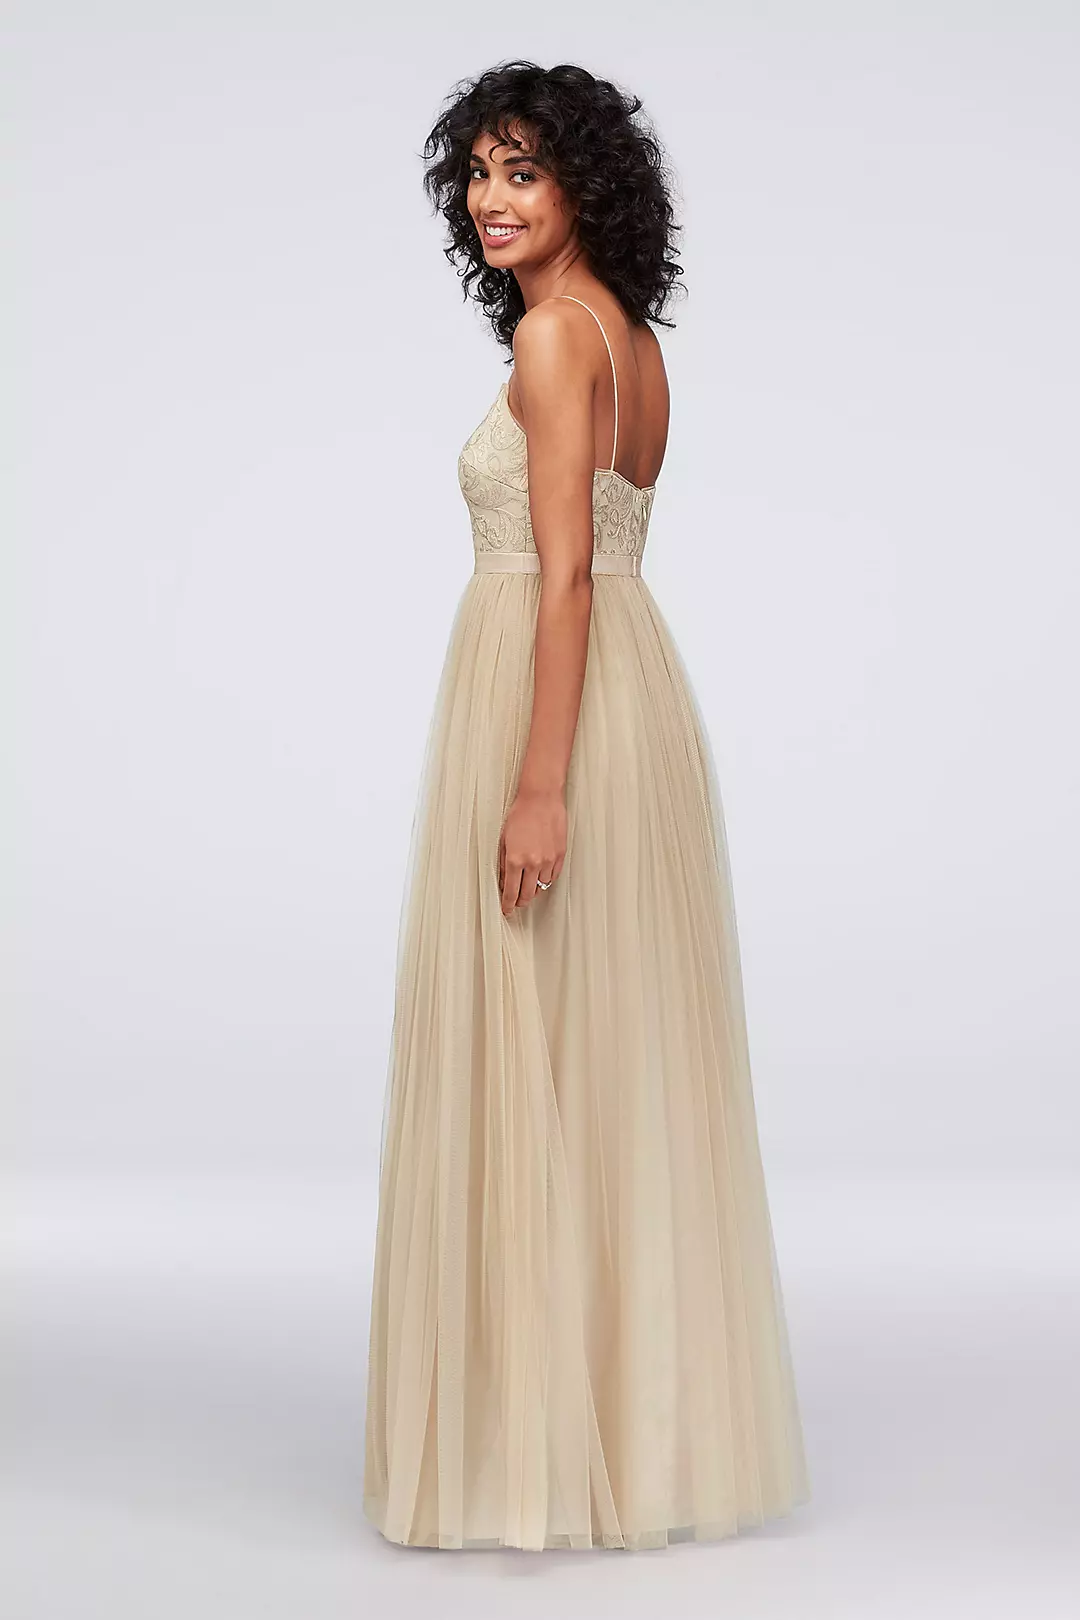 Sequin and Tulle A-Line Bridesmaid Dress Image 2